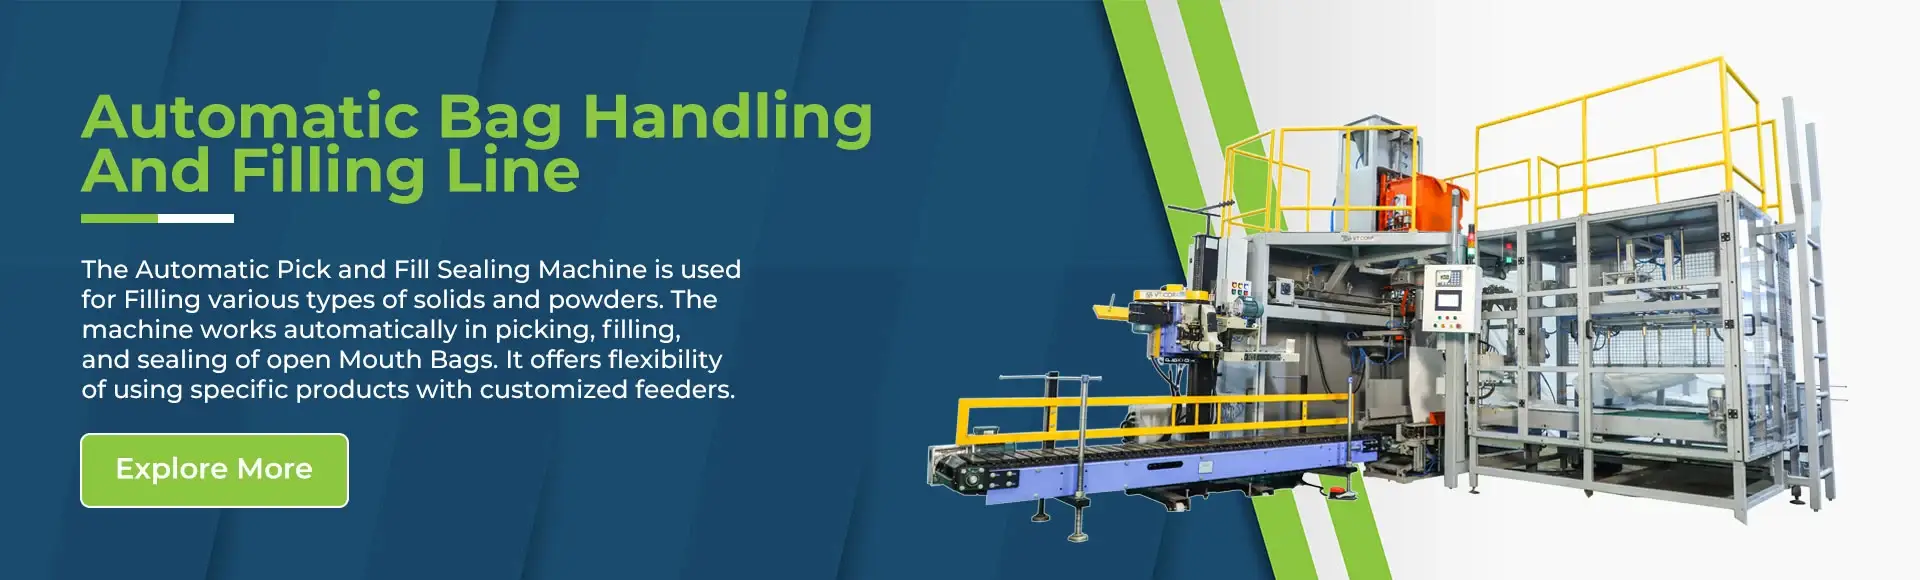 Automatic Bag Handling And Filling Line